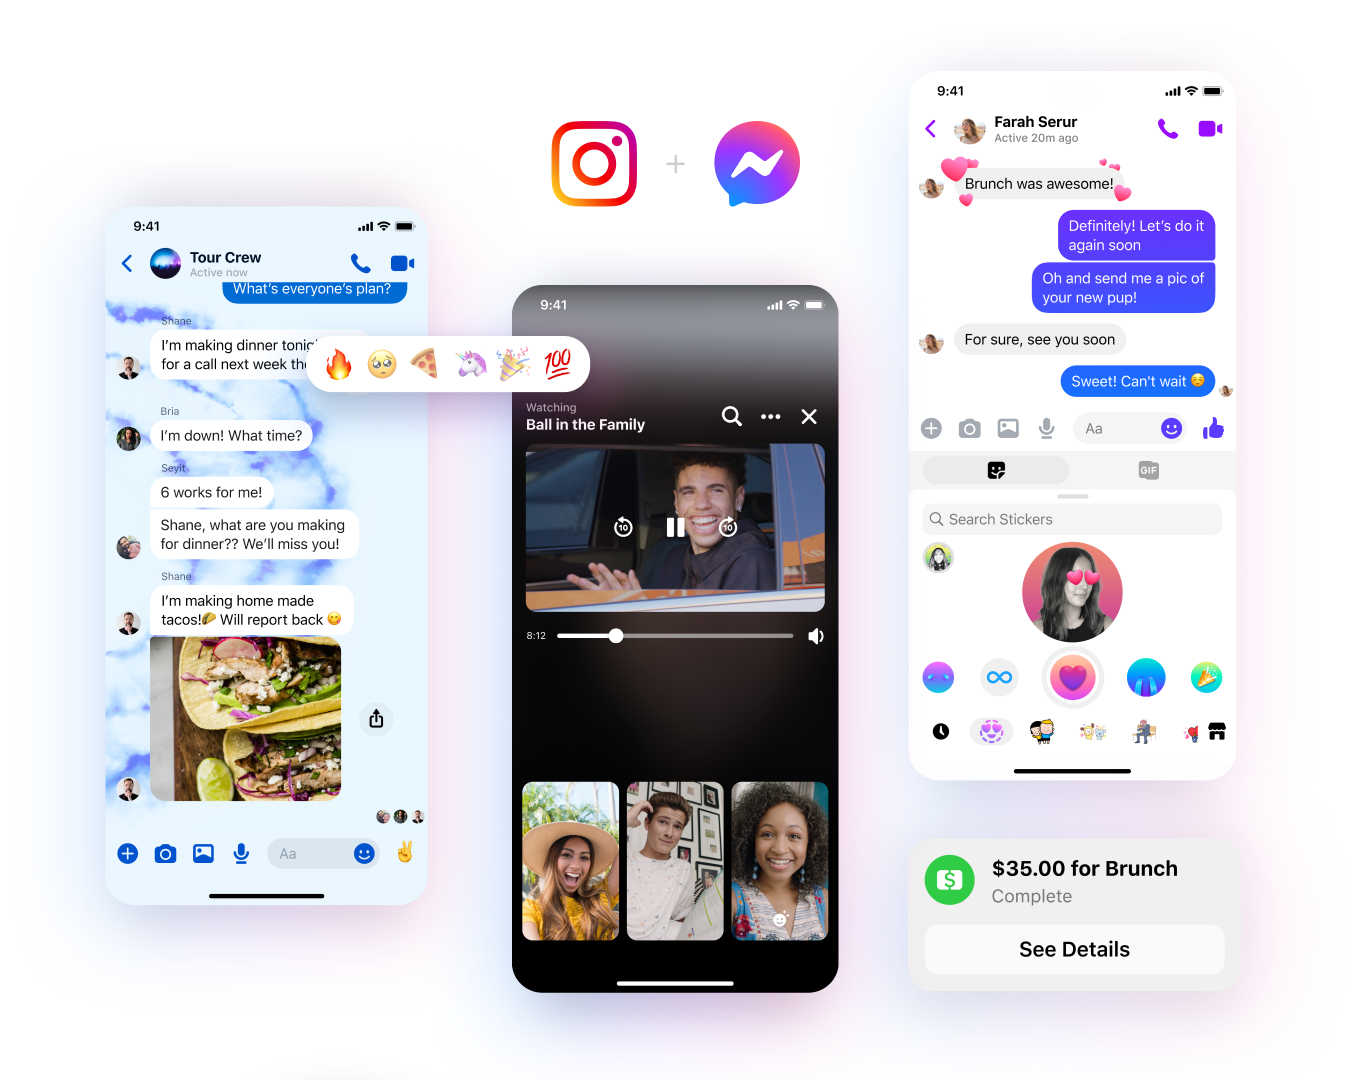 Facebook Messenger gets new look and features Lifestyle_IG.png